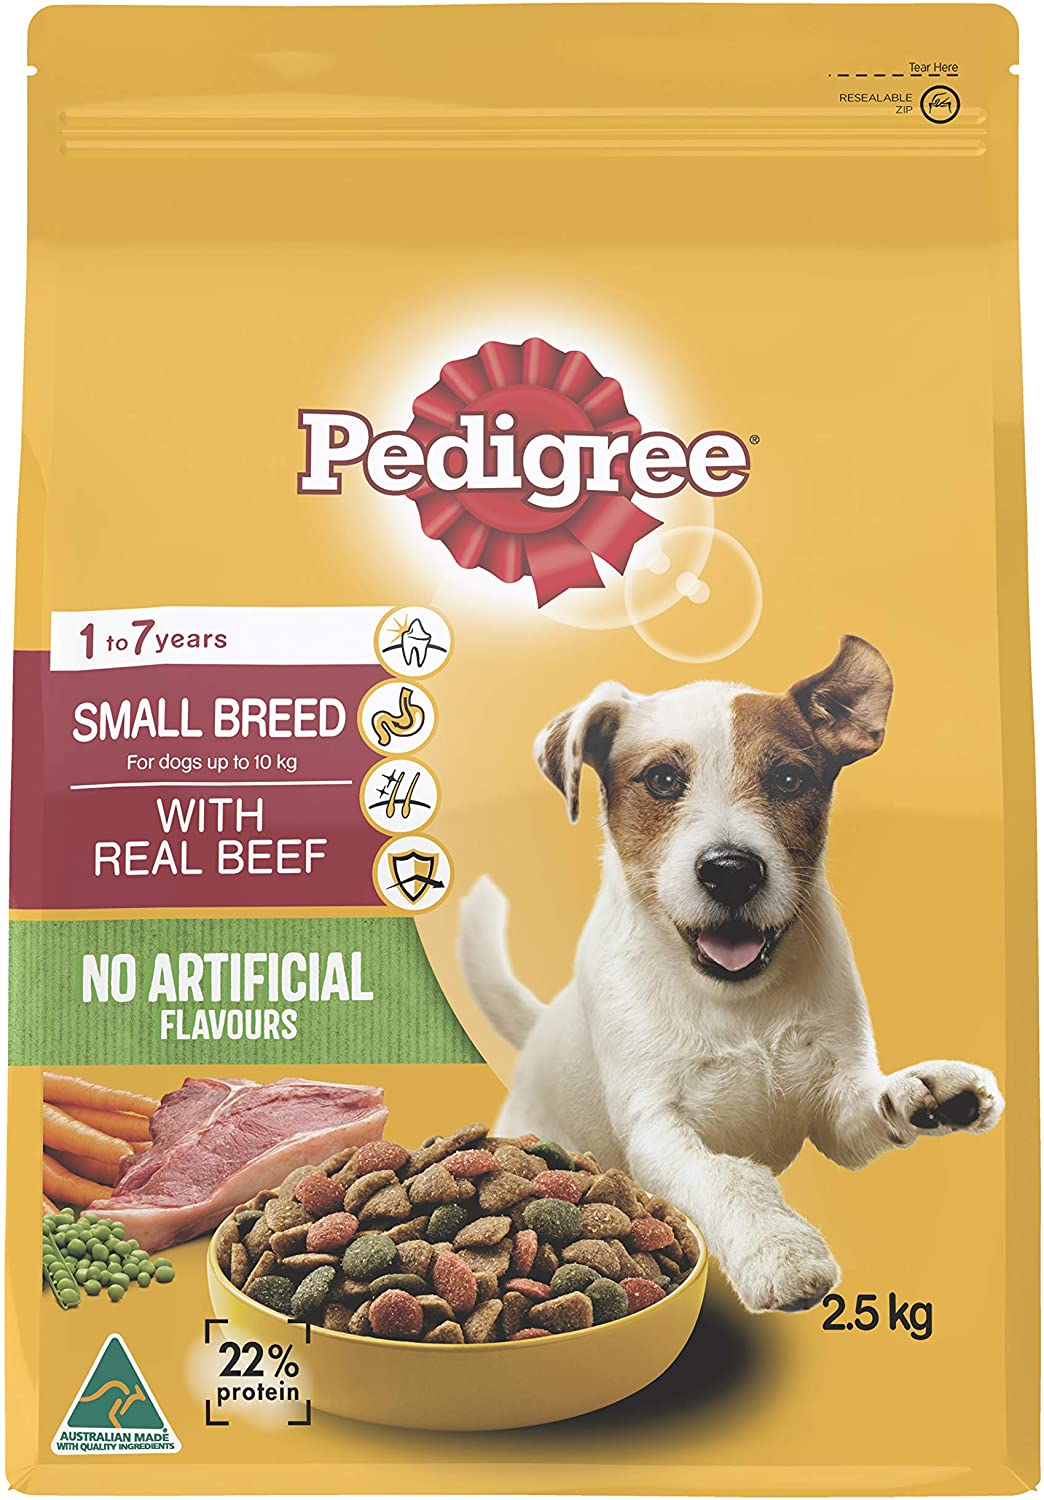 Pedigree Small Breed with Real Beef Dry Dog Food 2.5kg * (Bag Of 4)